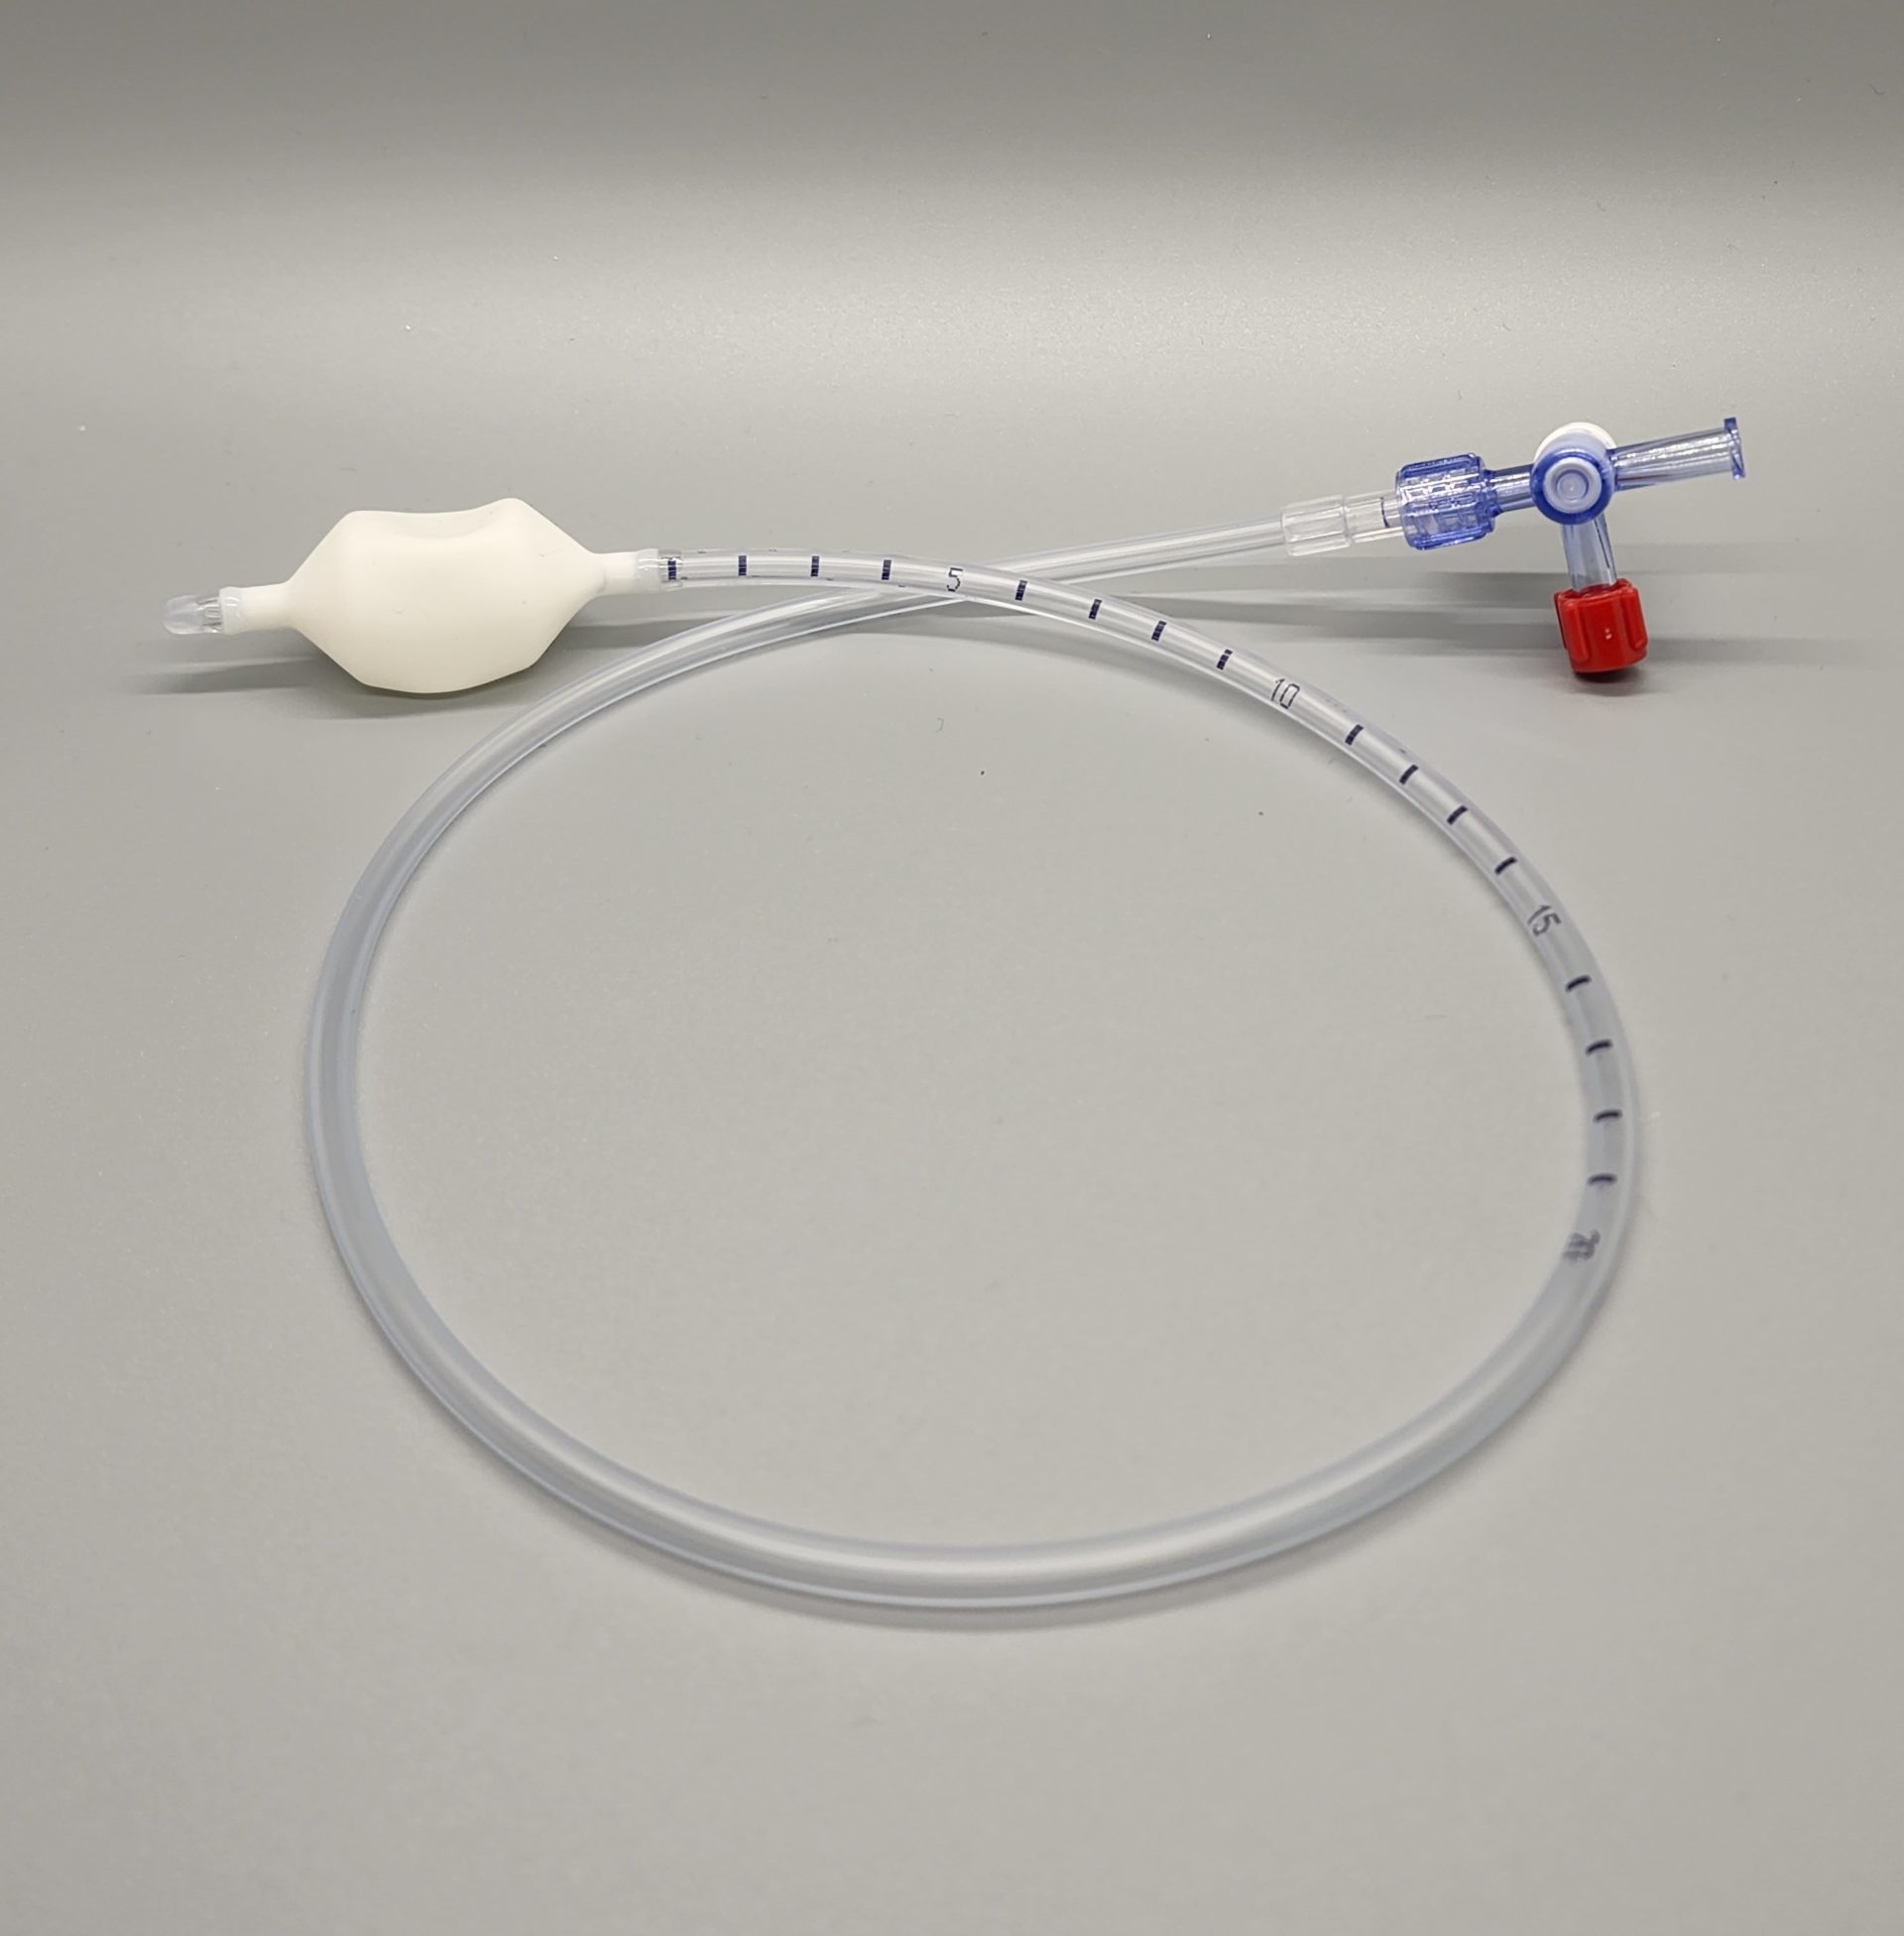 Anorectal Expulsion Balloon Catheter Mui Cmt Medical